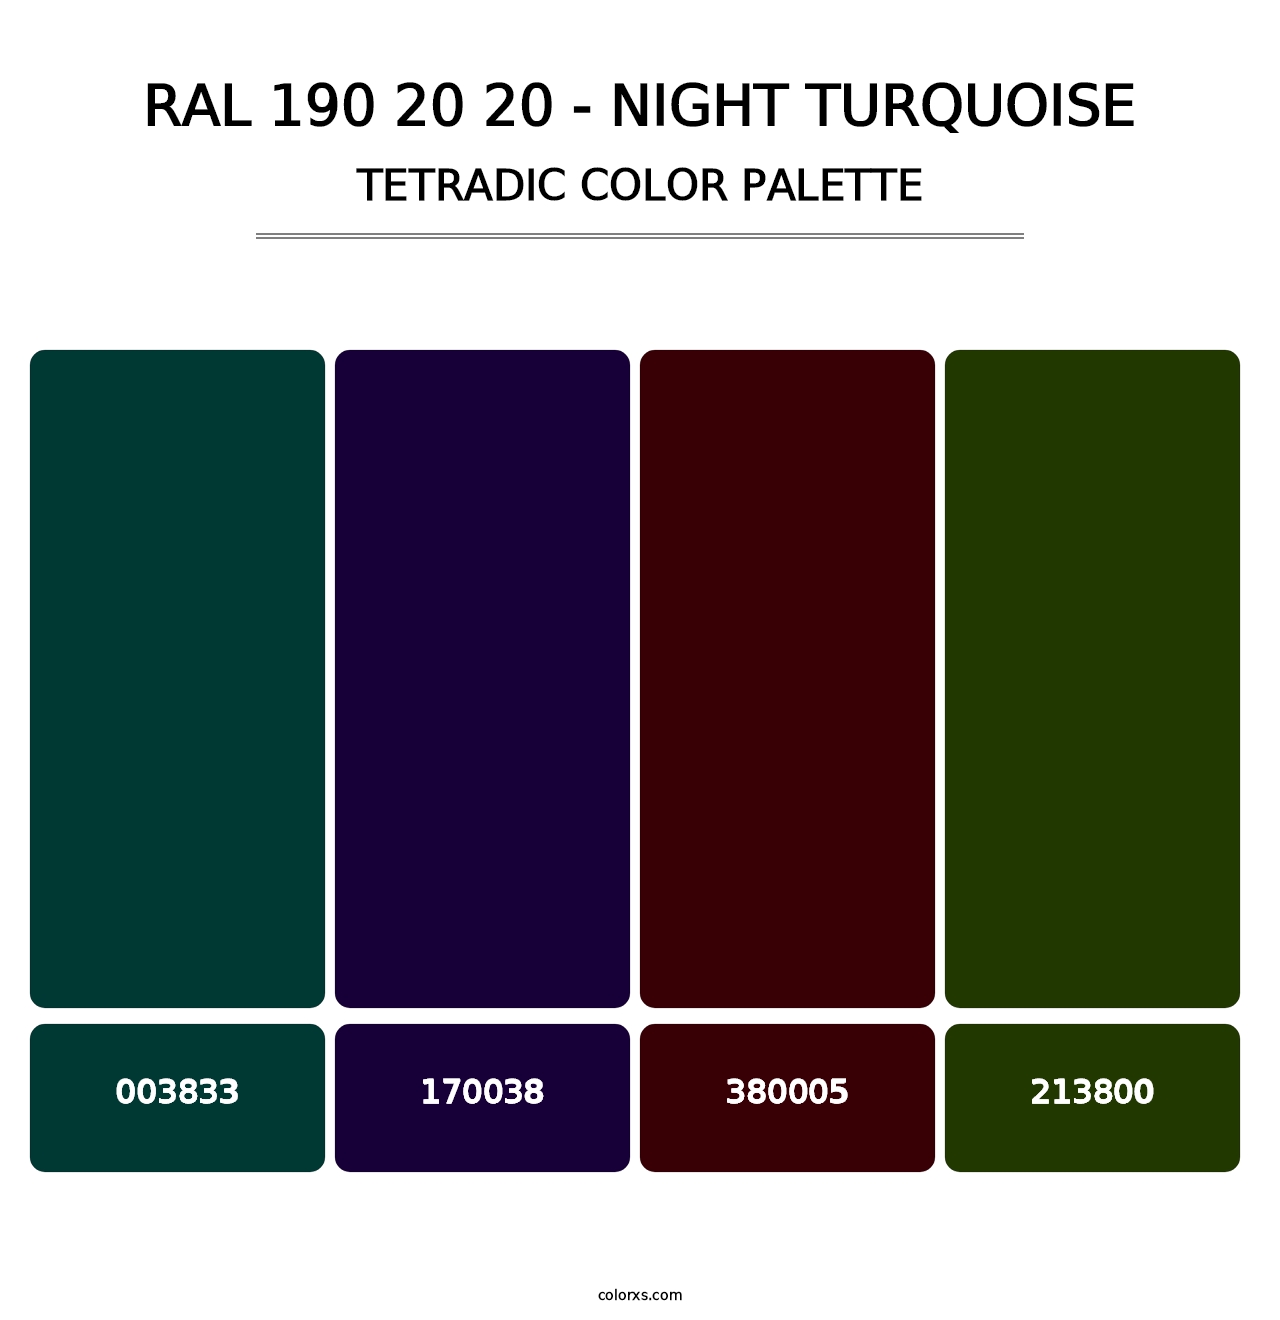 RAL 190 20 20 - Night Turquoise - Tetradic Color Palette